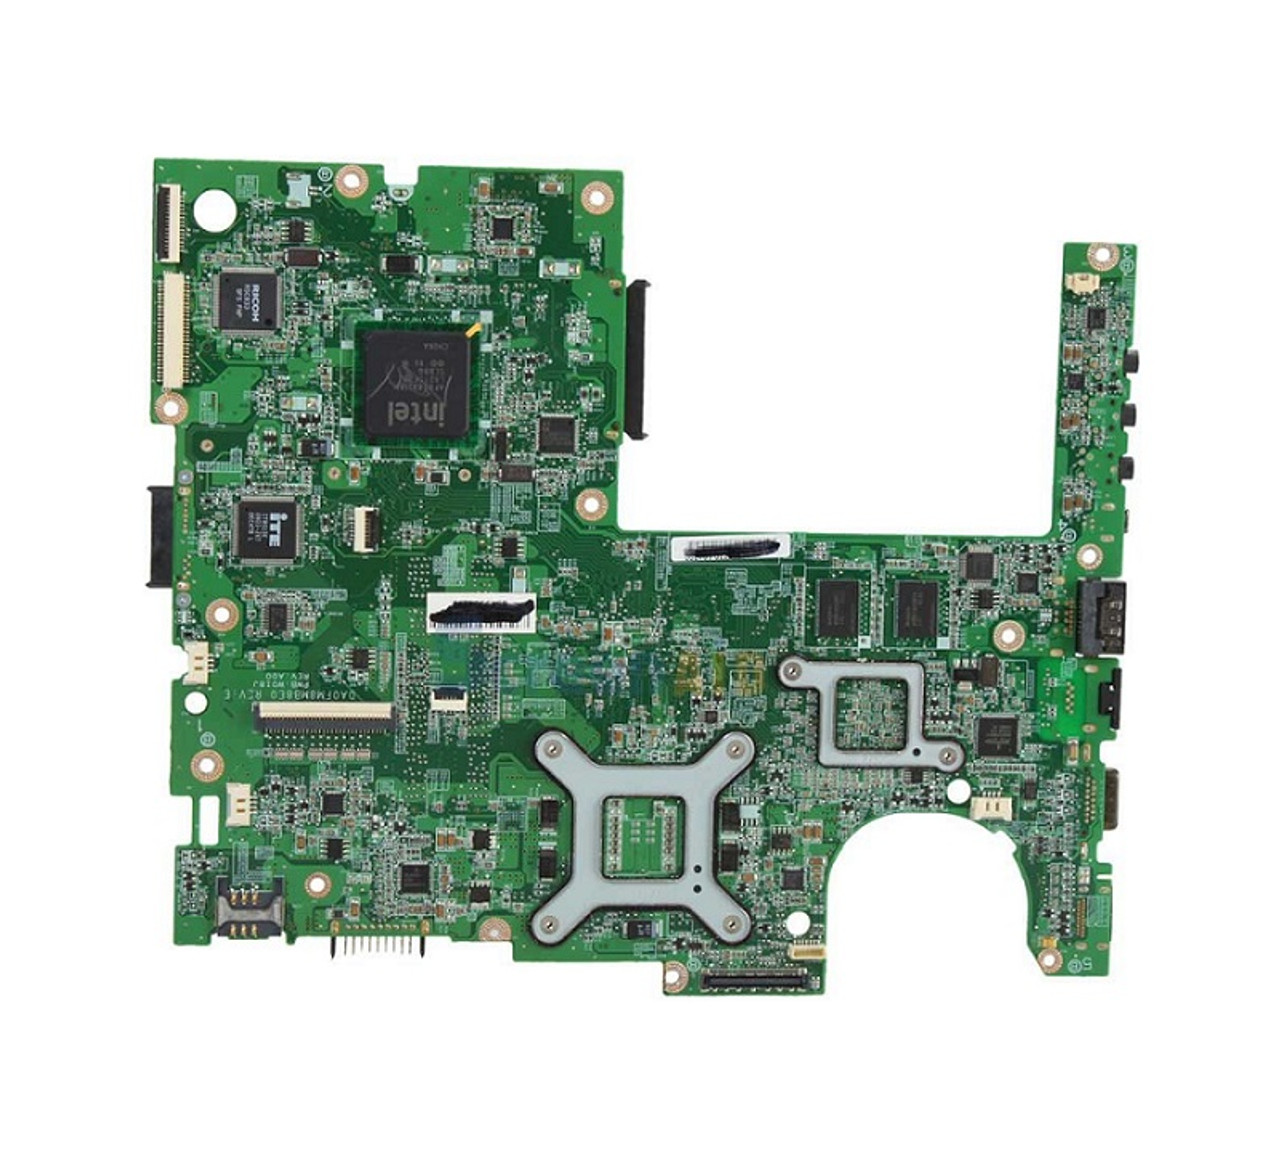 BA92-10258A - Samsung Motherboard with Intel i5-3317U 1.7GHz CPU for NP900X3C Laptop (Refurbished)